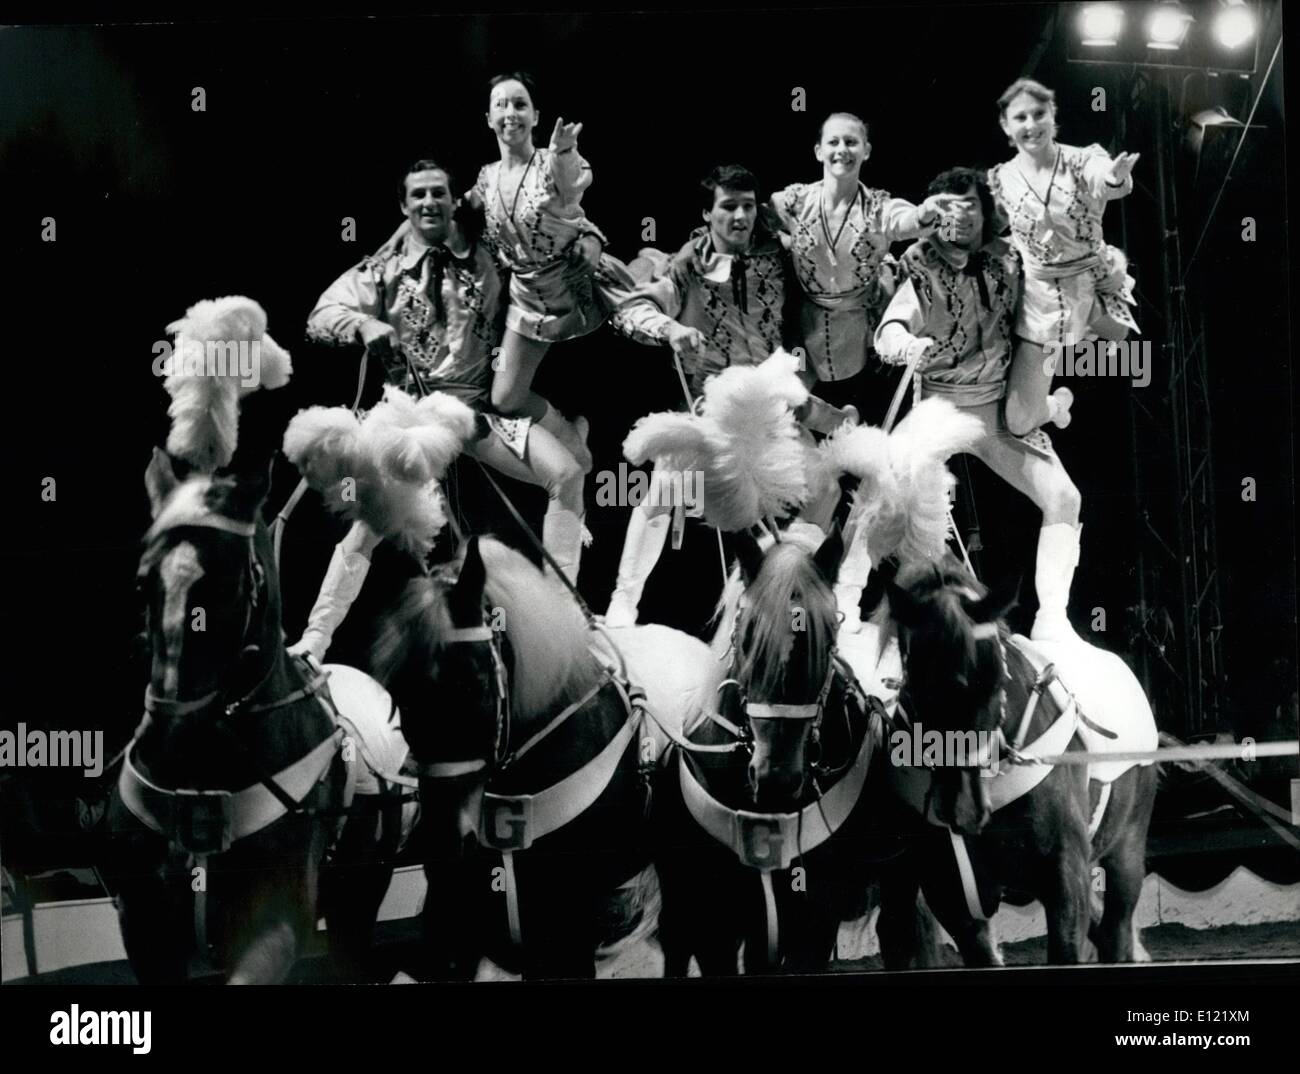 Dec. 12, 1981 - The Gruss Circus put up its tent in the center of the Marais in Paris like the old days. The elegant show makes Stock Photo